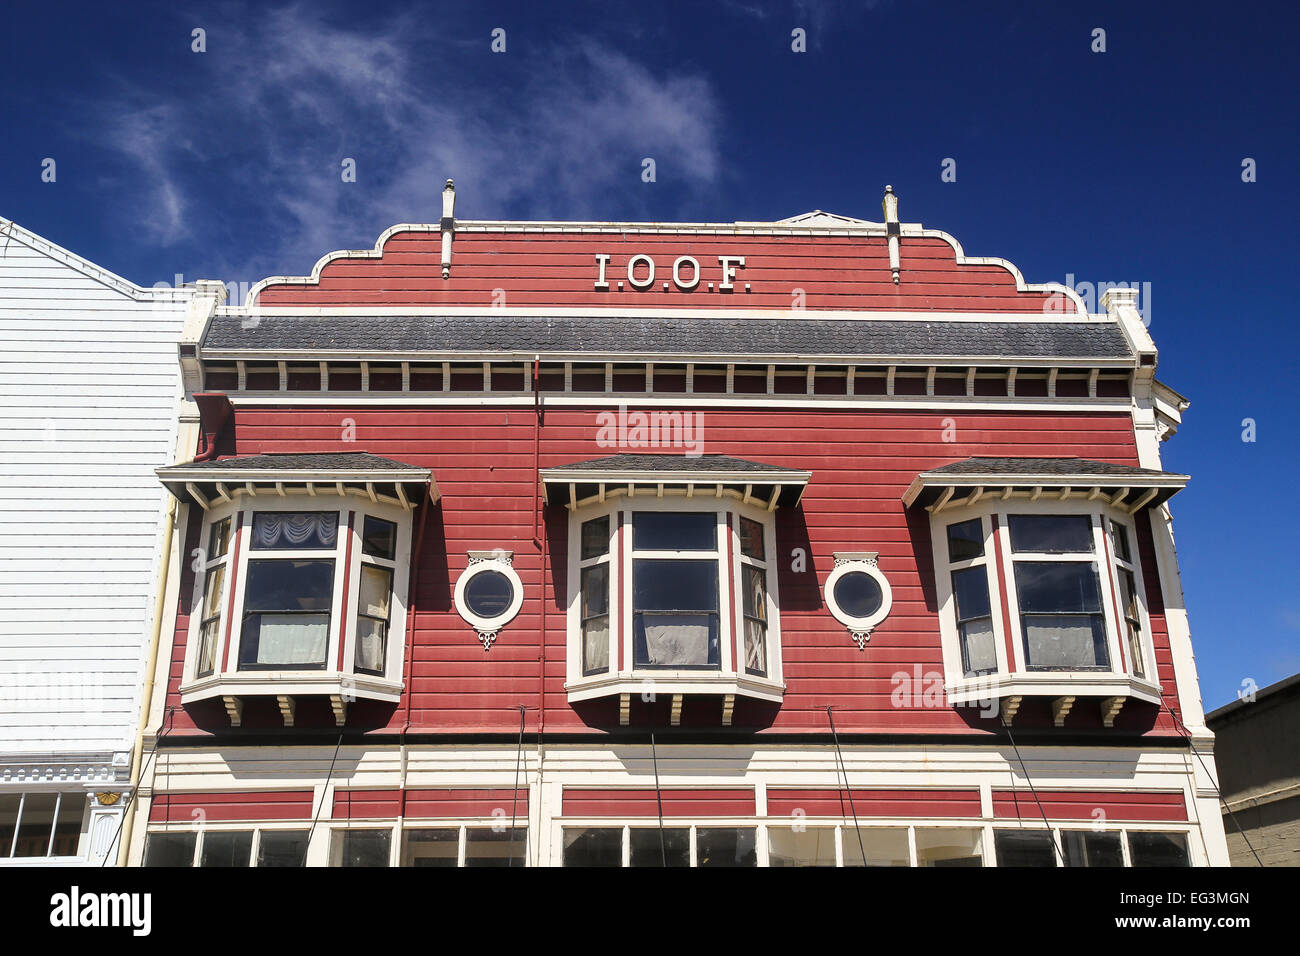 I.O.O.F. (Independent Order of Odd Fellows) building, Ferndale, California, United States Stock Photo